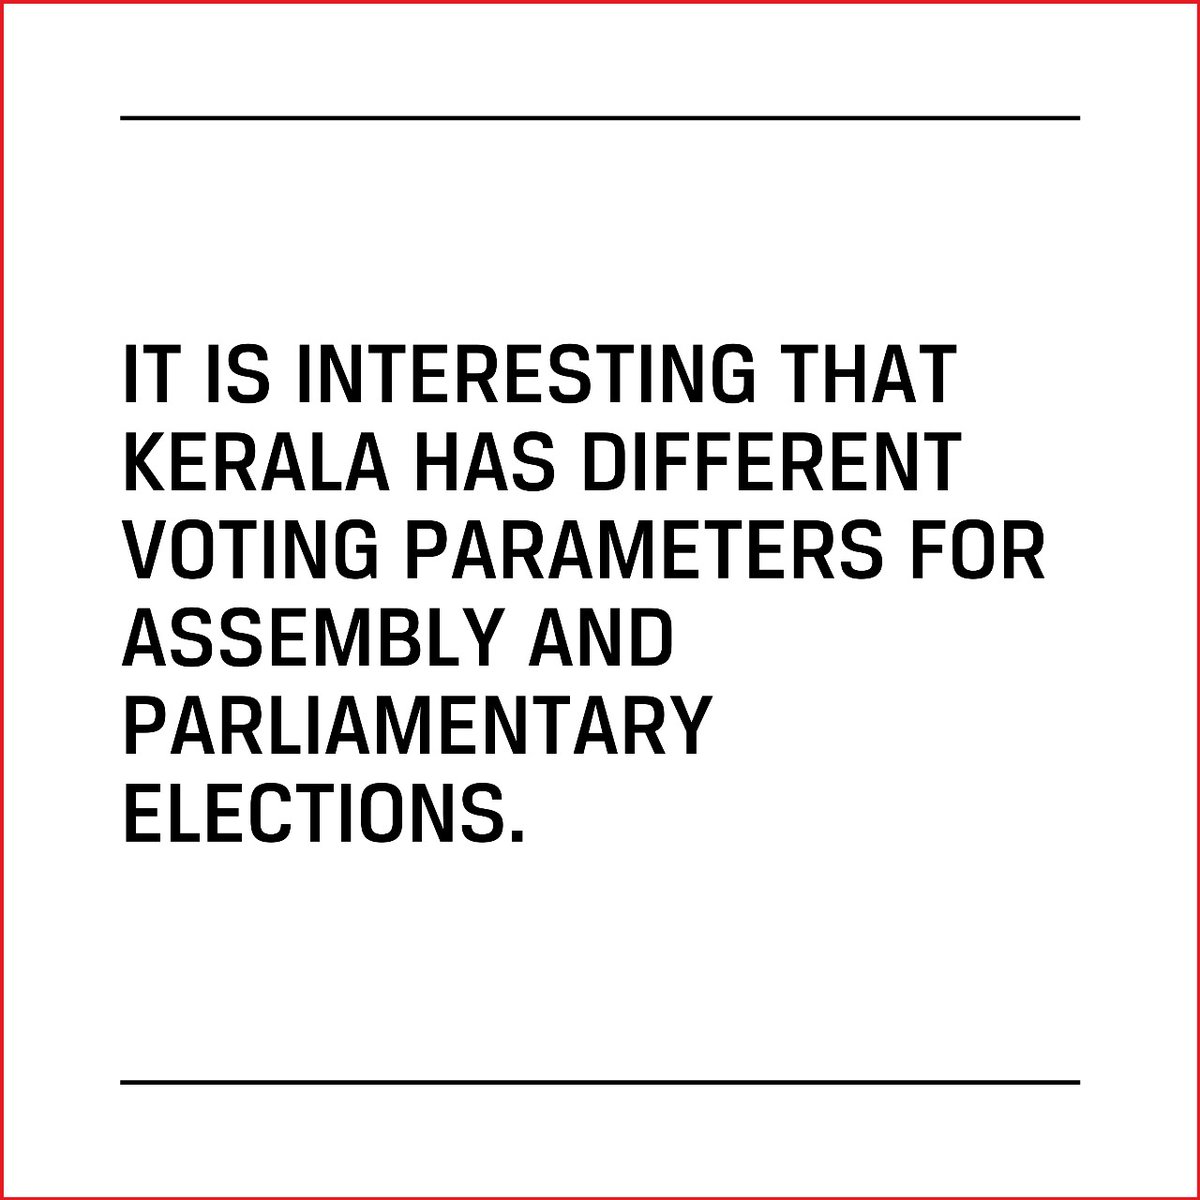 #OutlookMagazine | Personal attacks, lower voter turnout and the #BJP’s determined campaigning, #Kerala has seen unusual #voting patterns. 

@Shahina_Nafeesa writes

outlookindia.com/elections/kera…